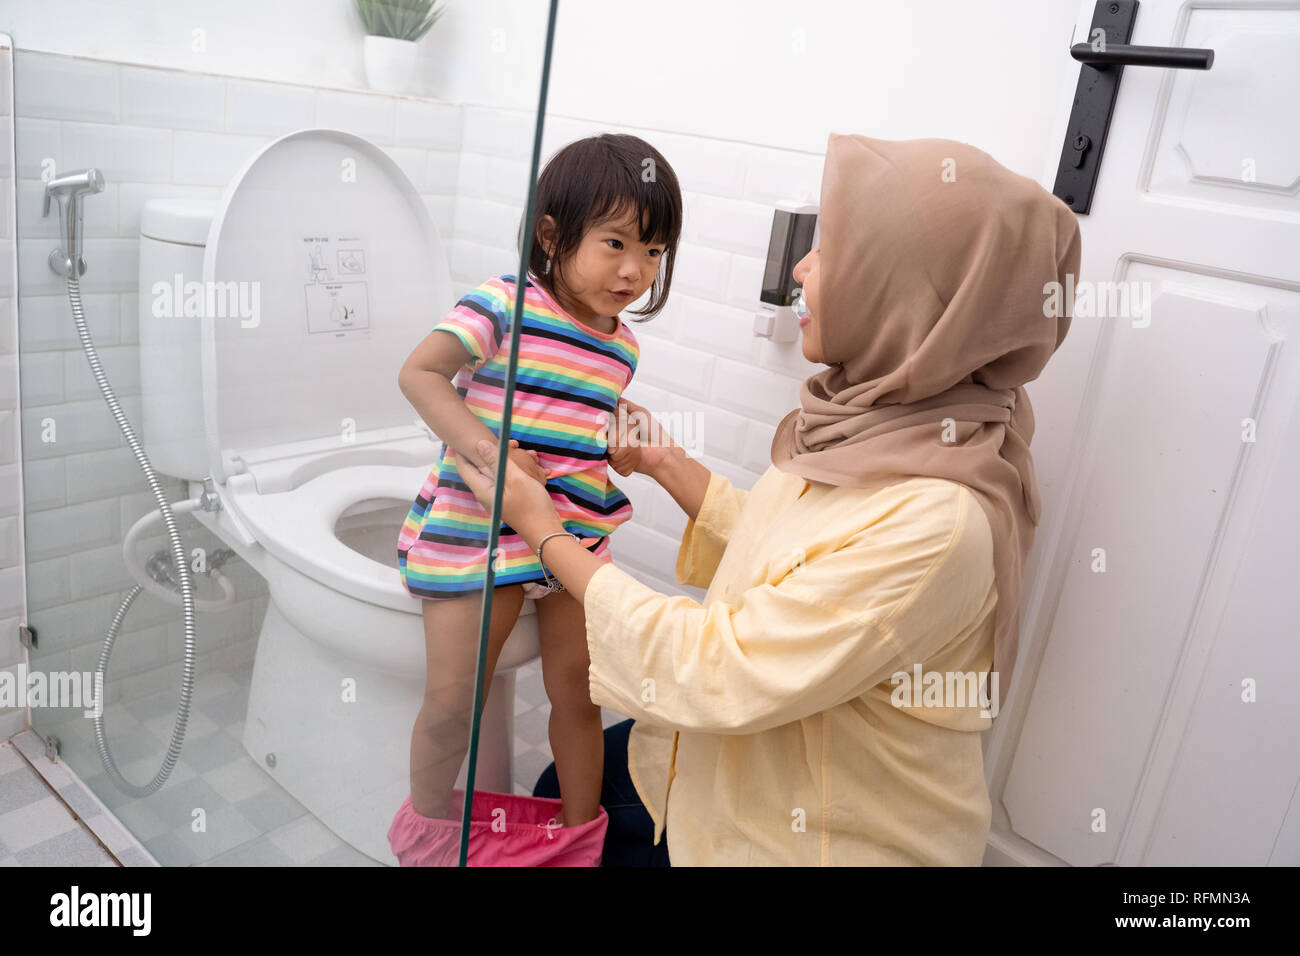 muslim mother help her kid to use toilet Stock Photo